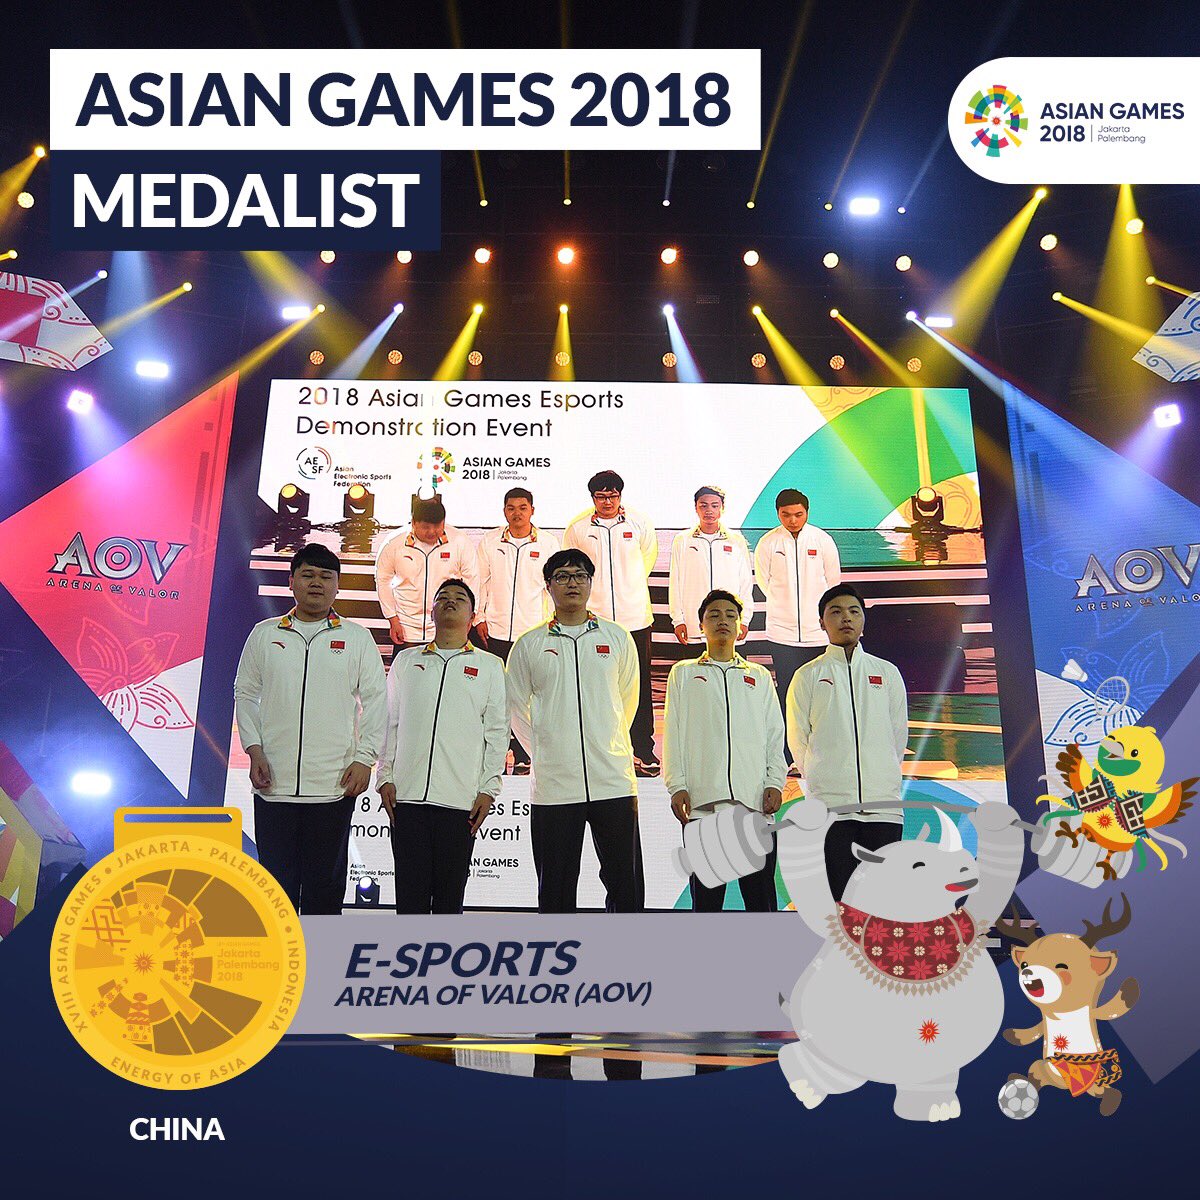 Asian Games 2018 On Twitter Competitive Video Gaming Is No Longer A Thing Of Hobby Especially After Yesterday S Debut As An Exhibition Event At Britama Arena Jakarta Soon To Be Included As